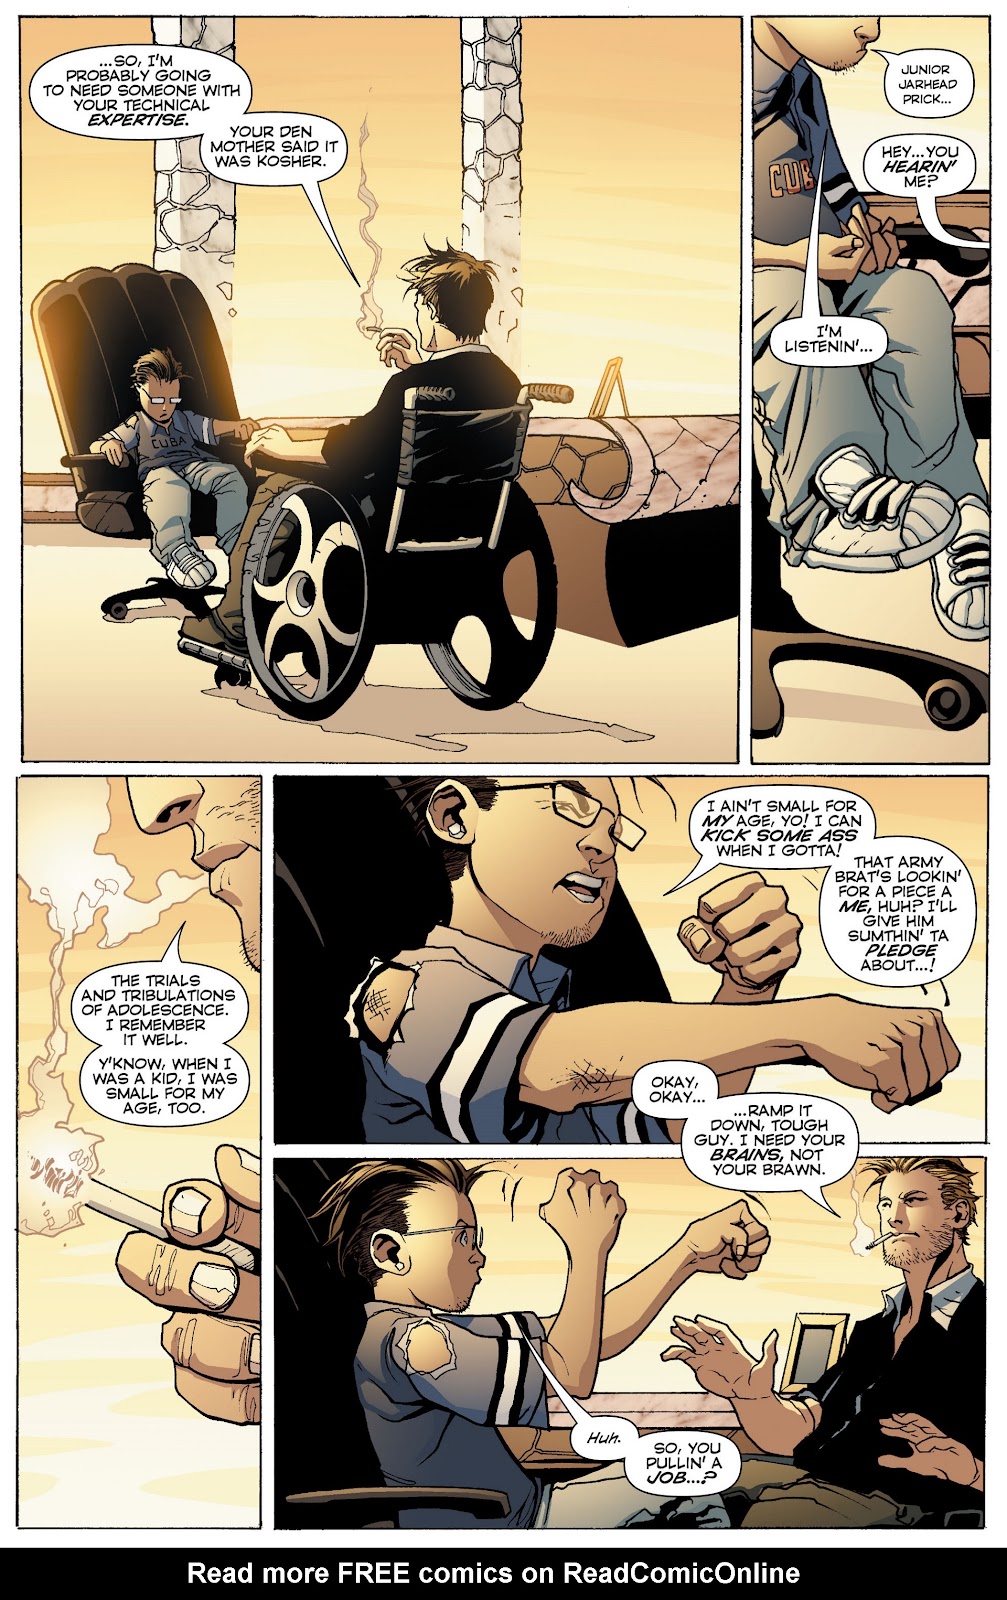 Wildcats Version 3.0 Issue #14 #14 - English 5